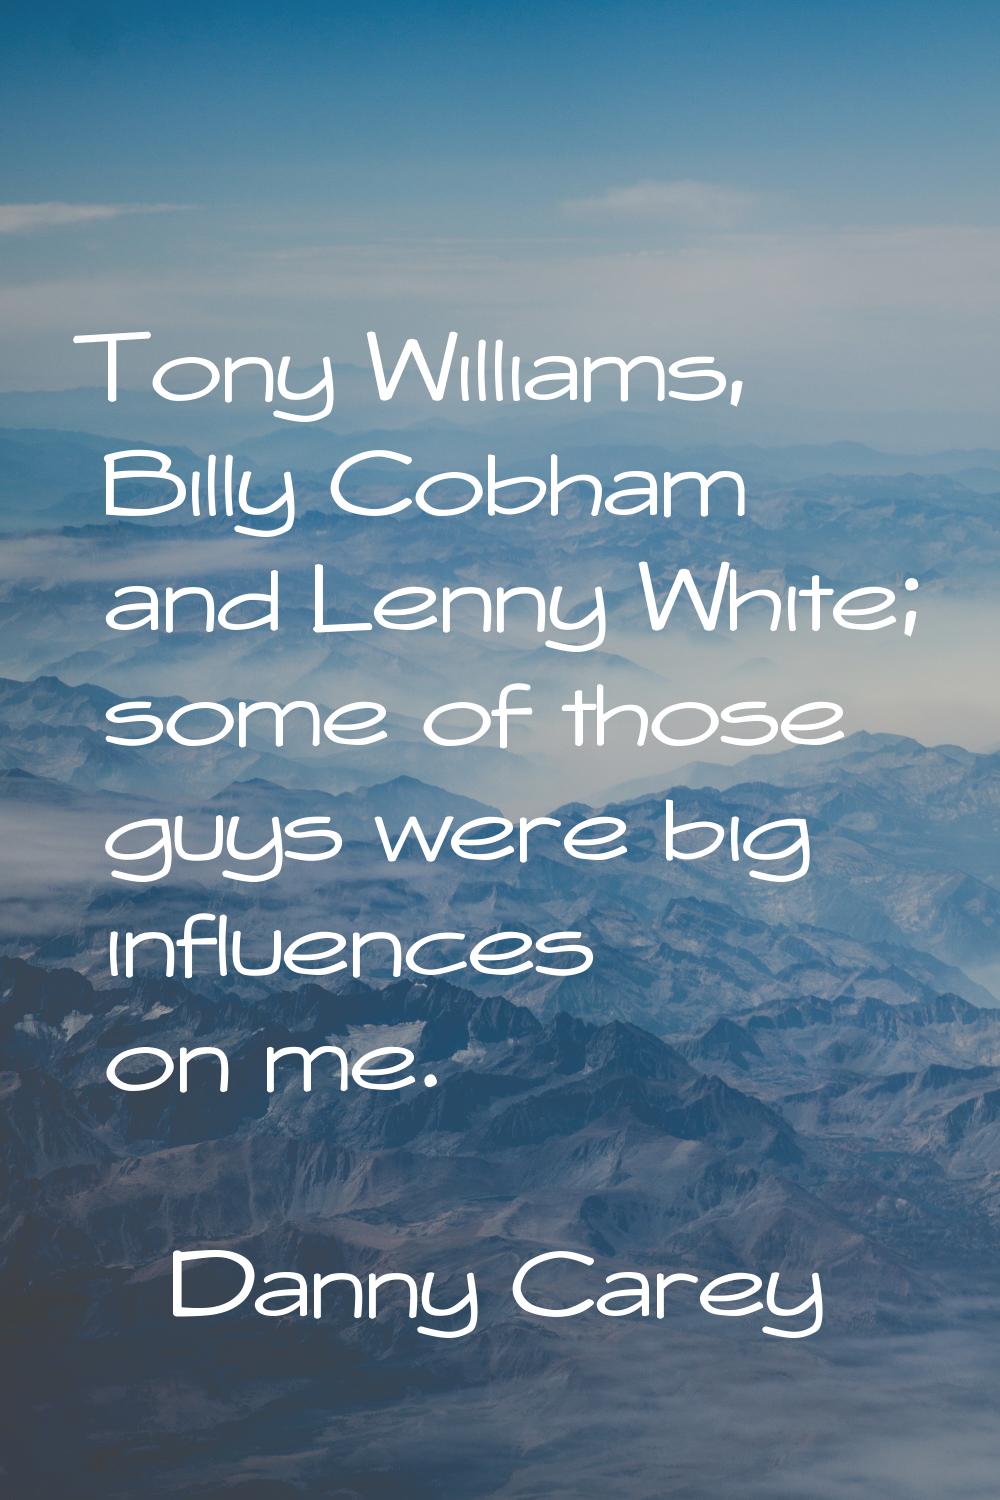 Tony Williams, Billy Cobham and Lenny White; some of those guys were big influences on me.